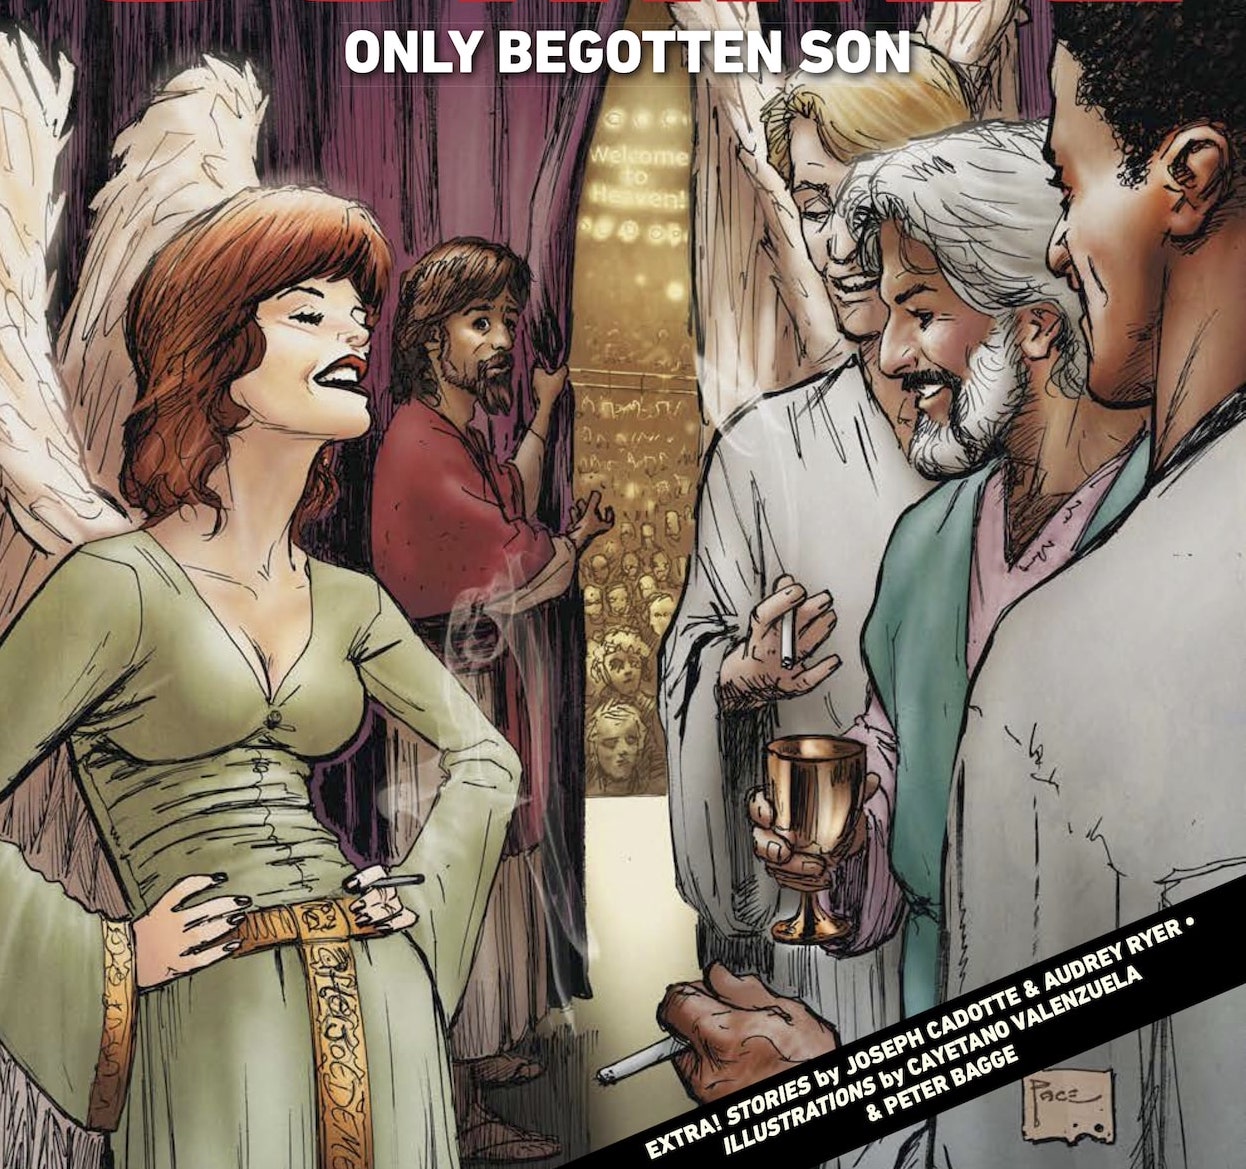 EXCLUSIVE AHOY Comics Preview: Second Coming Only Begotten Son #5